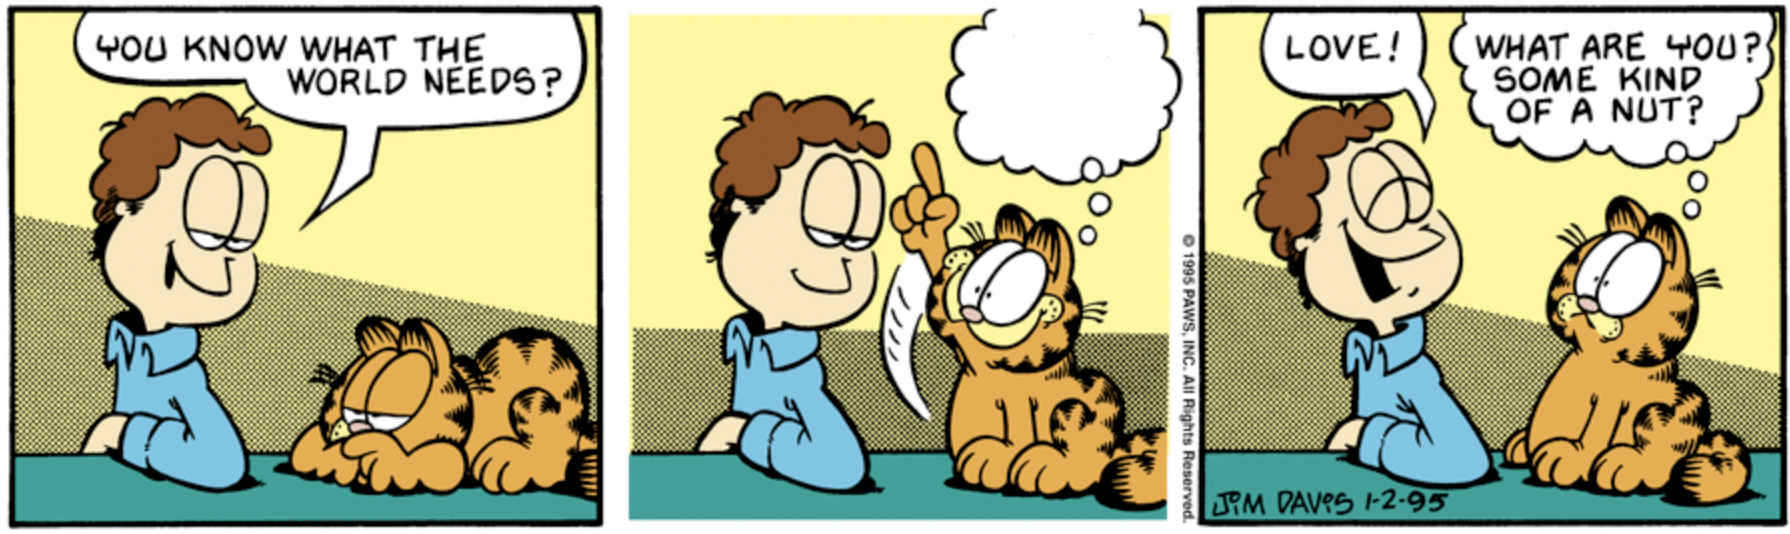 Garfield You Know What The World Needs? Blank Meme Template